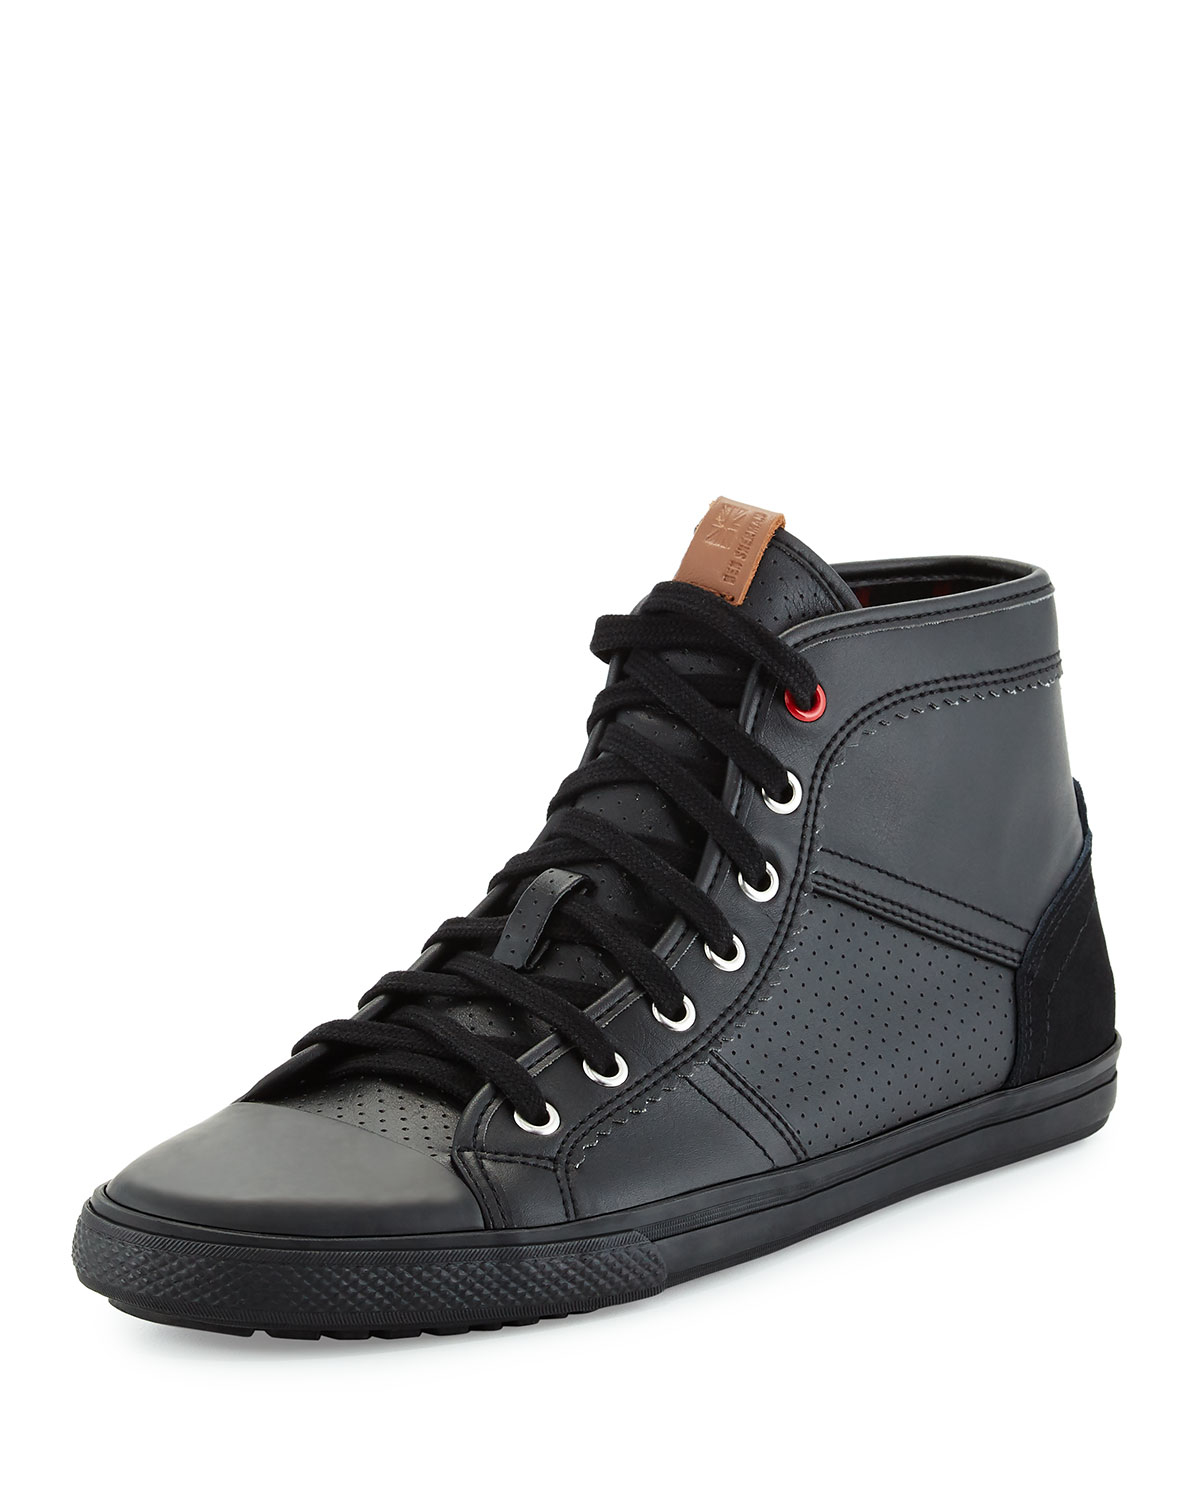 Ben Sherman Mitchell Faux-leather High-top Sneaker in Black for Men - Lyst